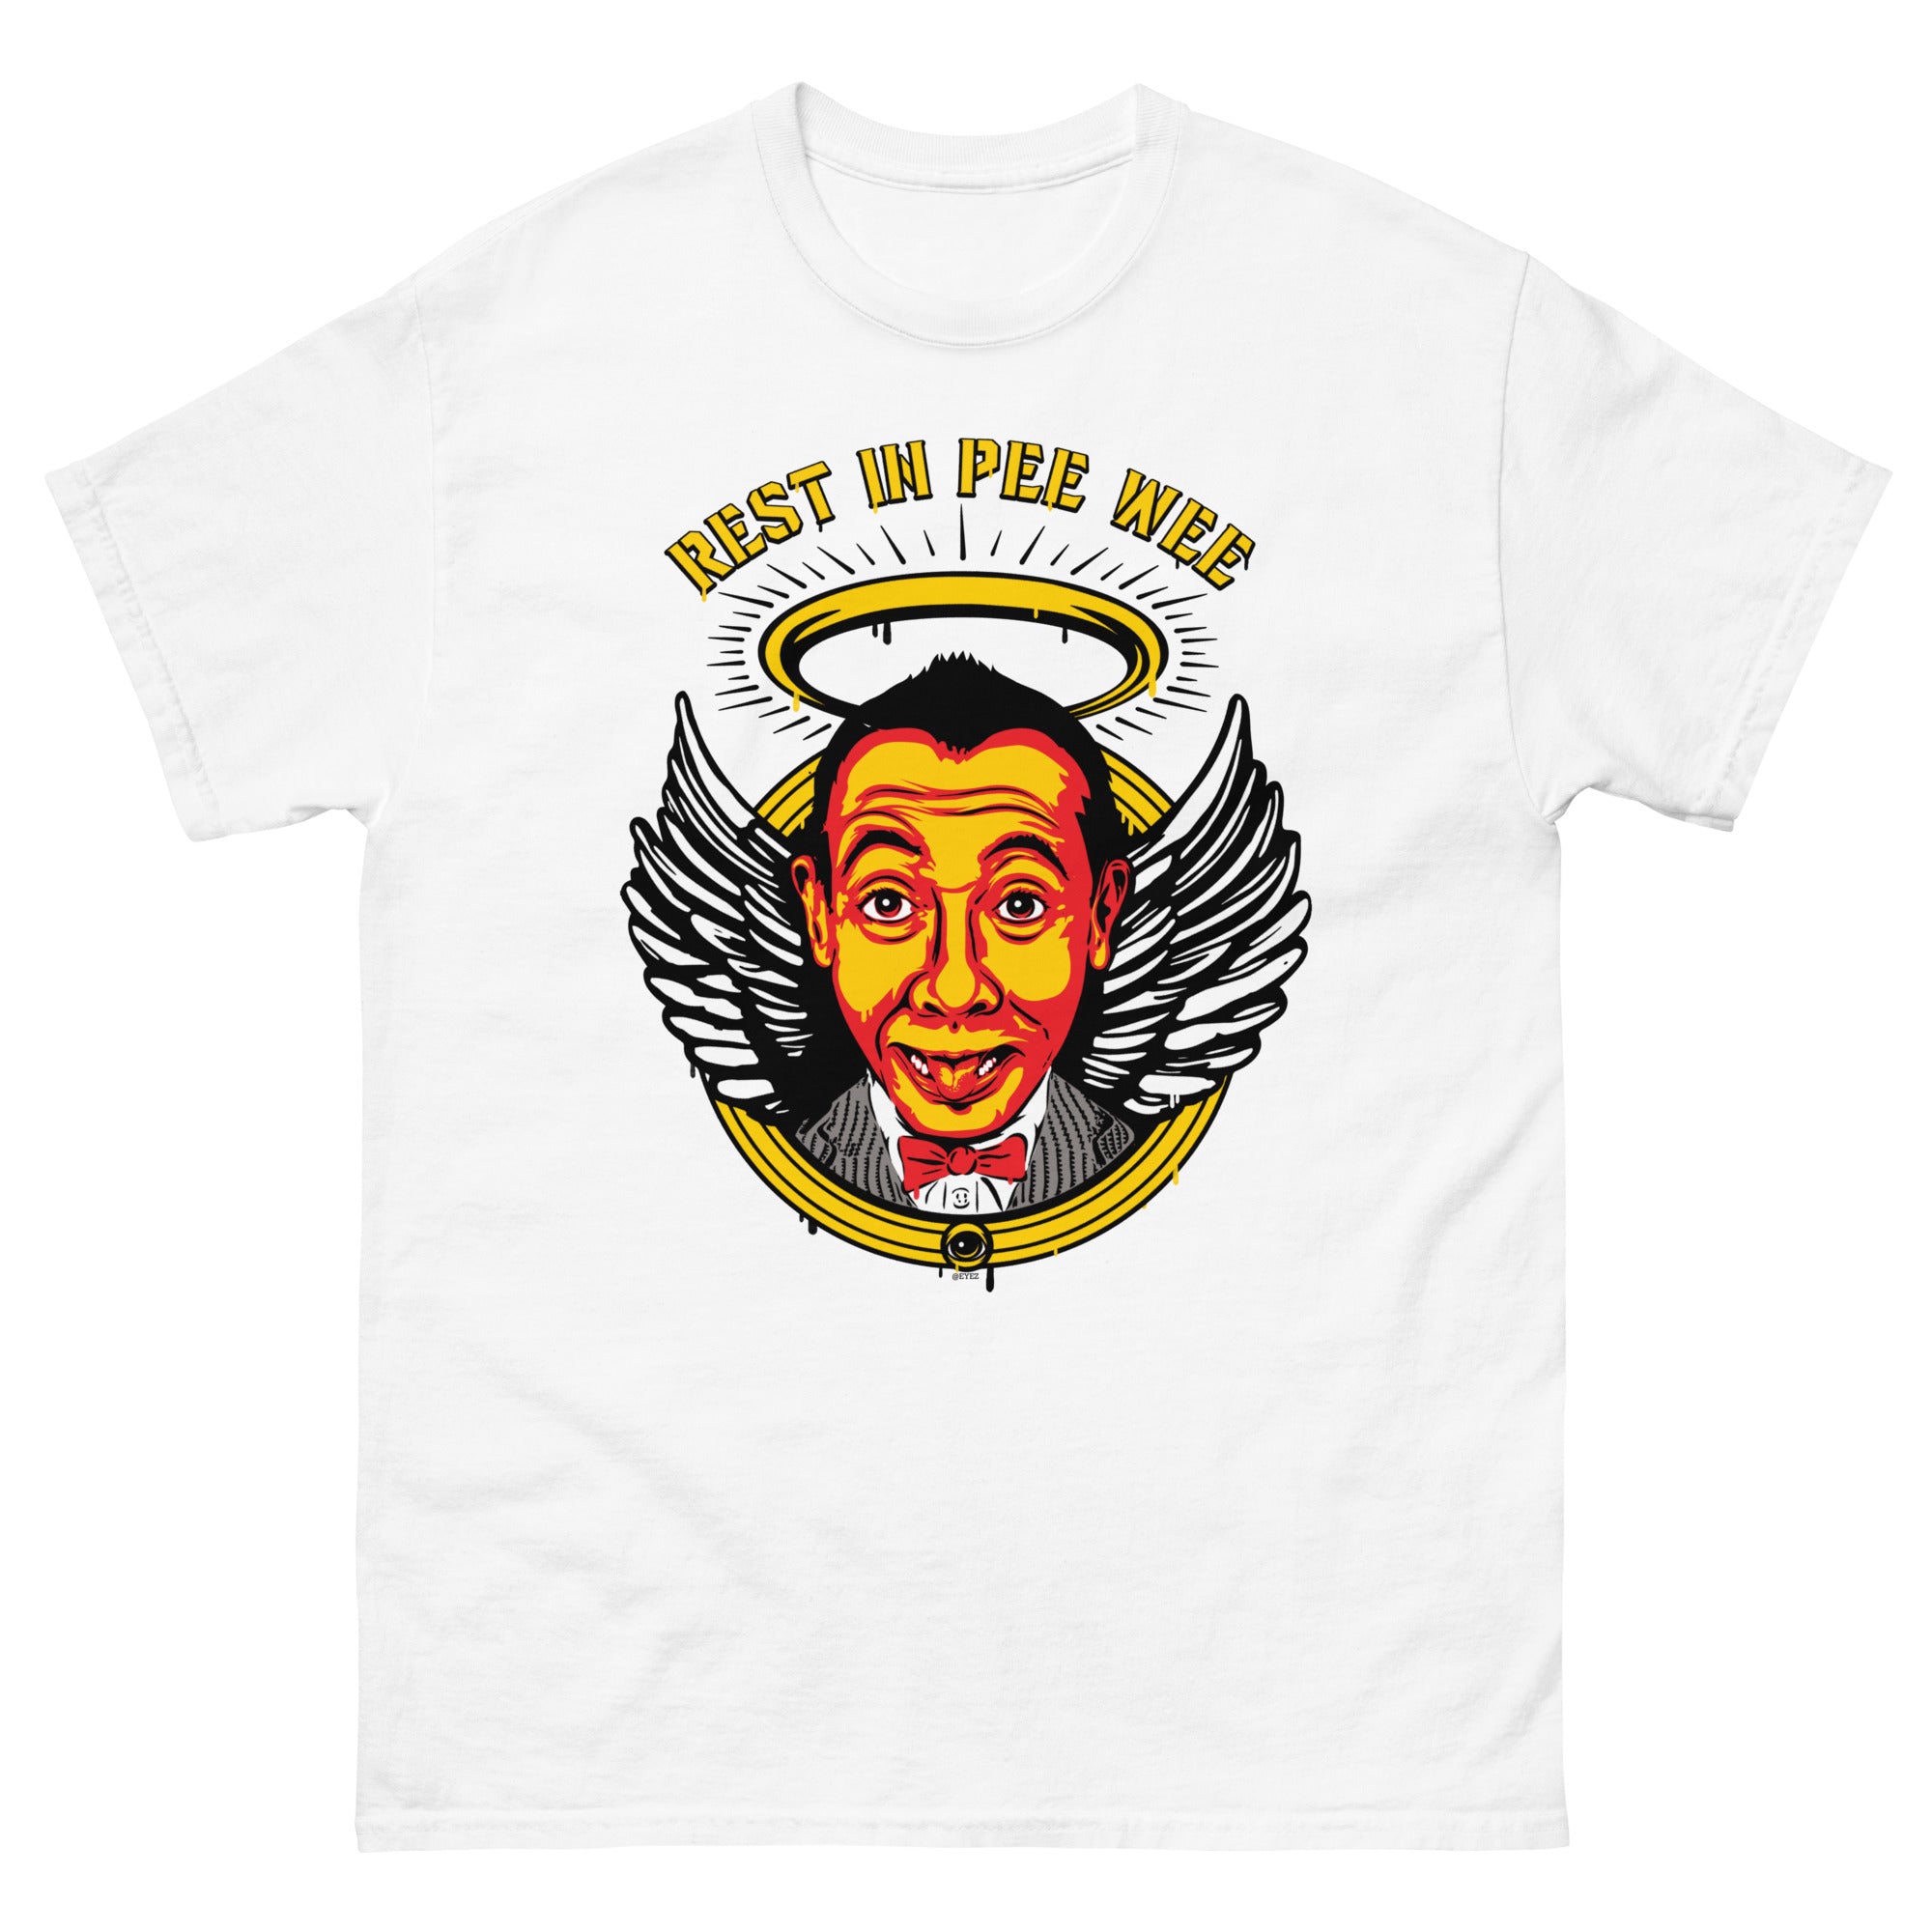 Rest in Pee Wee - classic tee